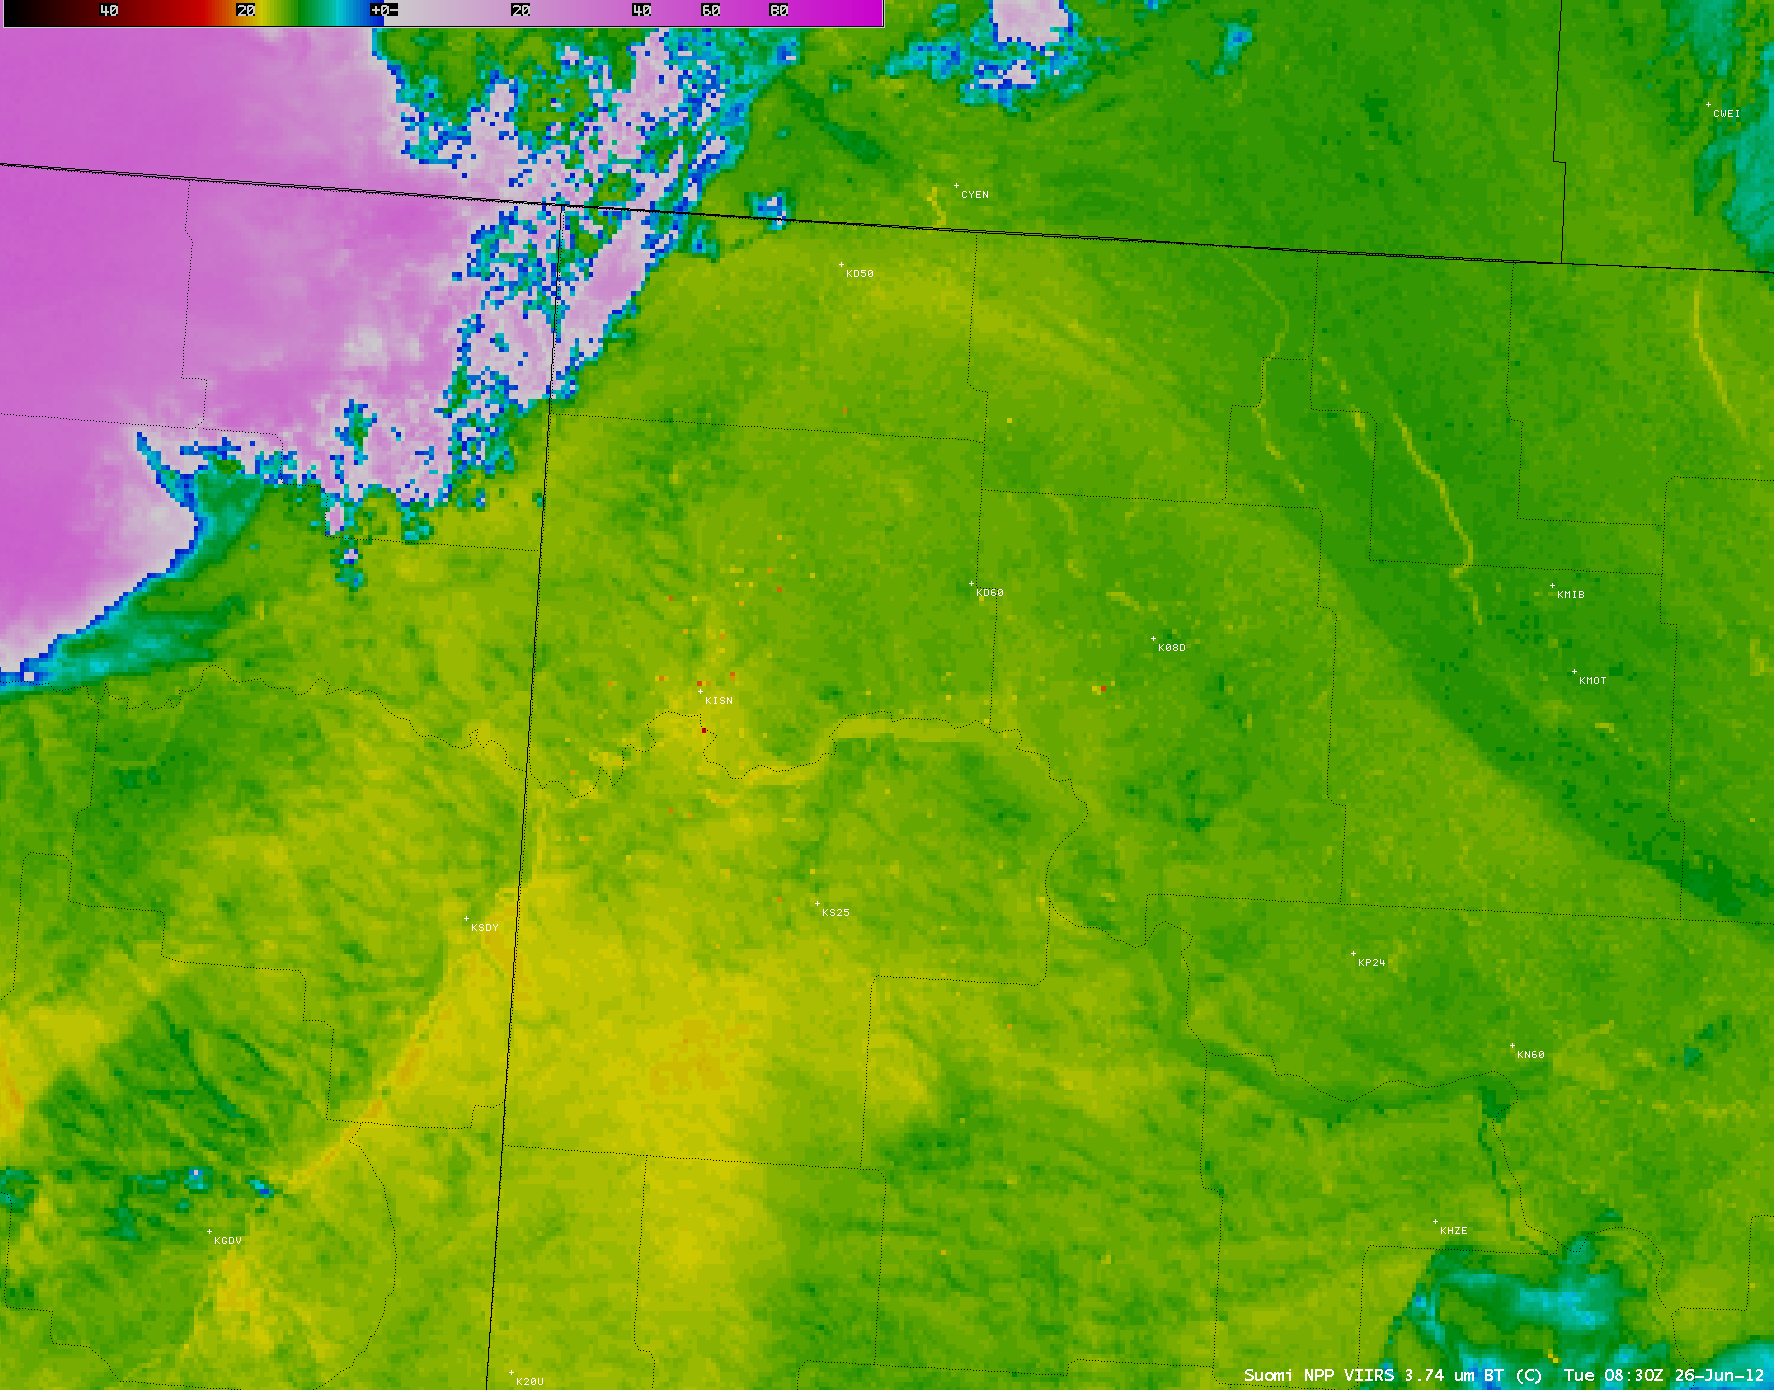 Suomi NPP VIIRS 3.74 µm shortwave IR and 0.7 µm Day/Night Band images